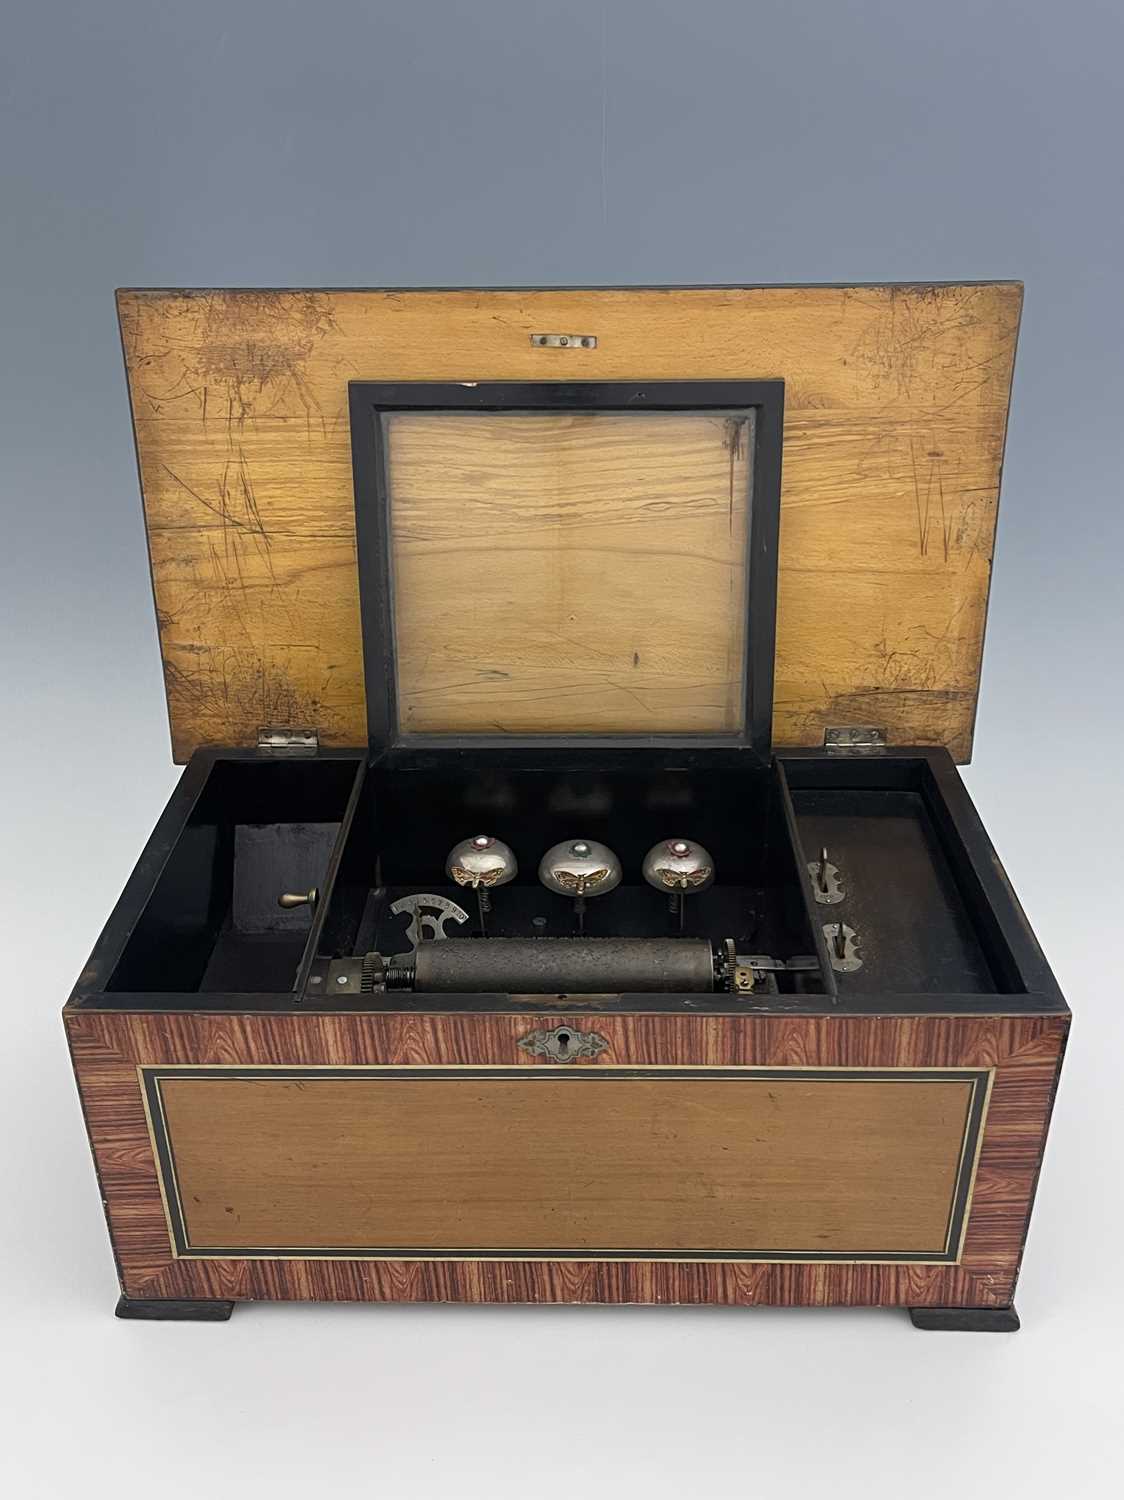 A 19th century Swiss 10 air musical box, with three bells, simulated rosewood case with painted